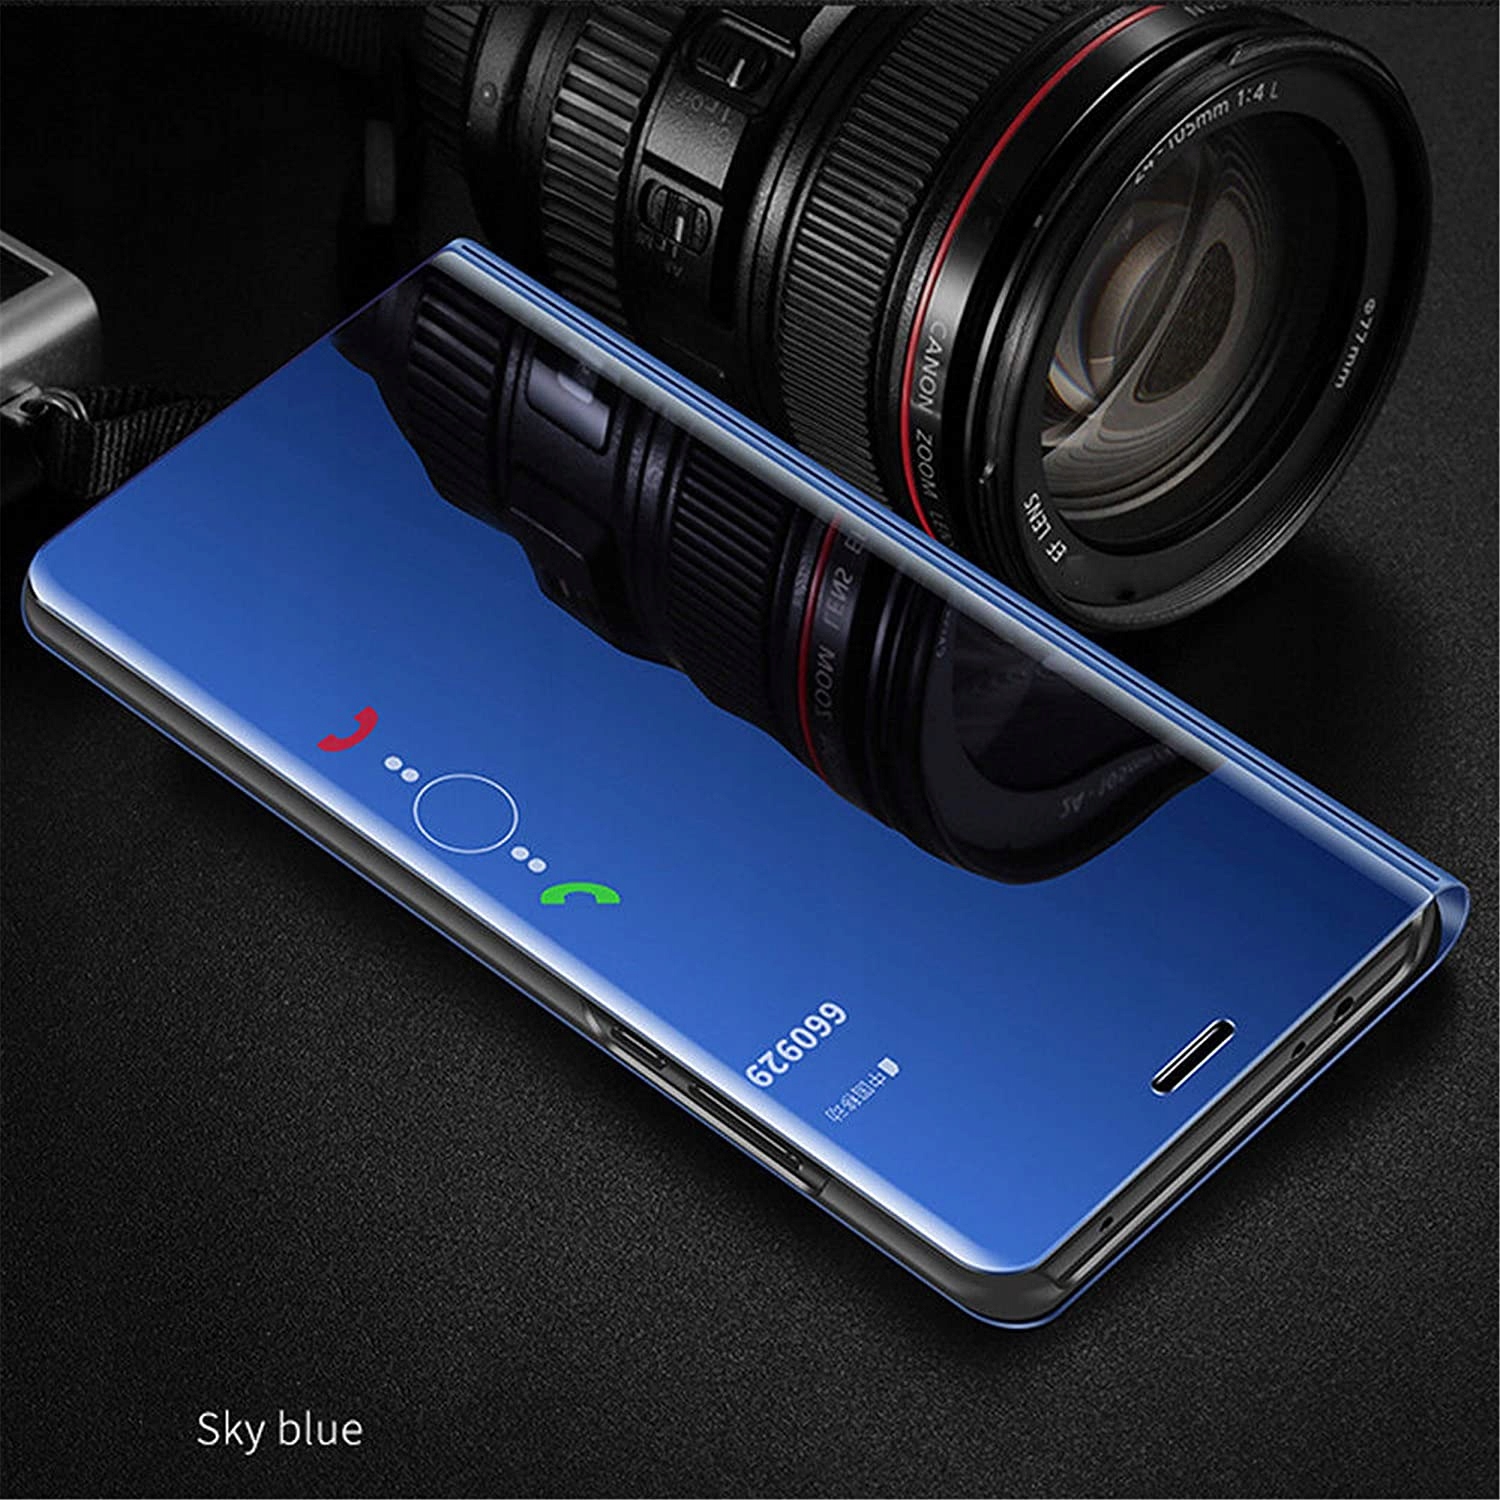 Etui do Huawei P20 Lite CLEAR VIEW CASE + SZKŁO 9H Producent Hammer